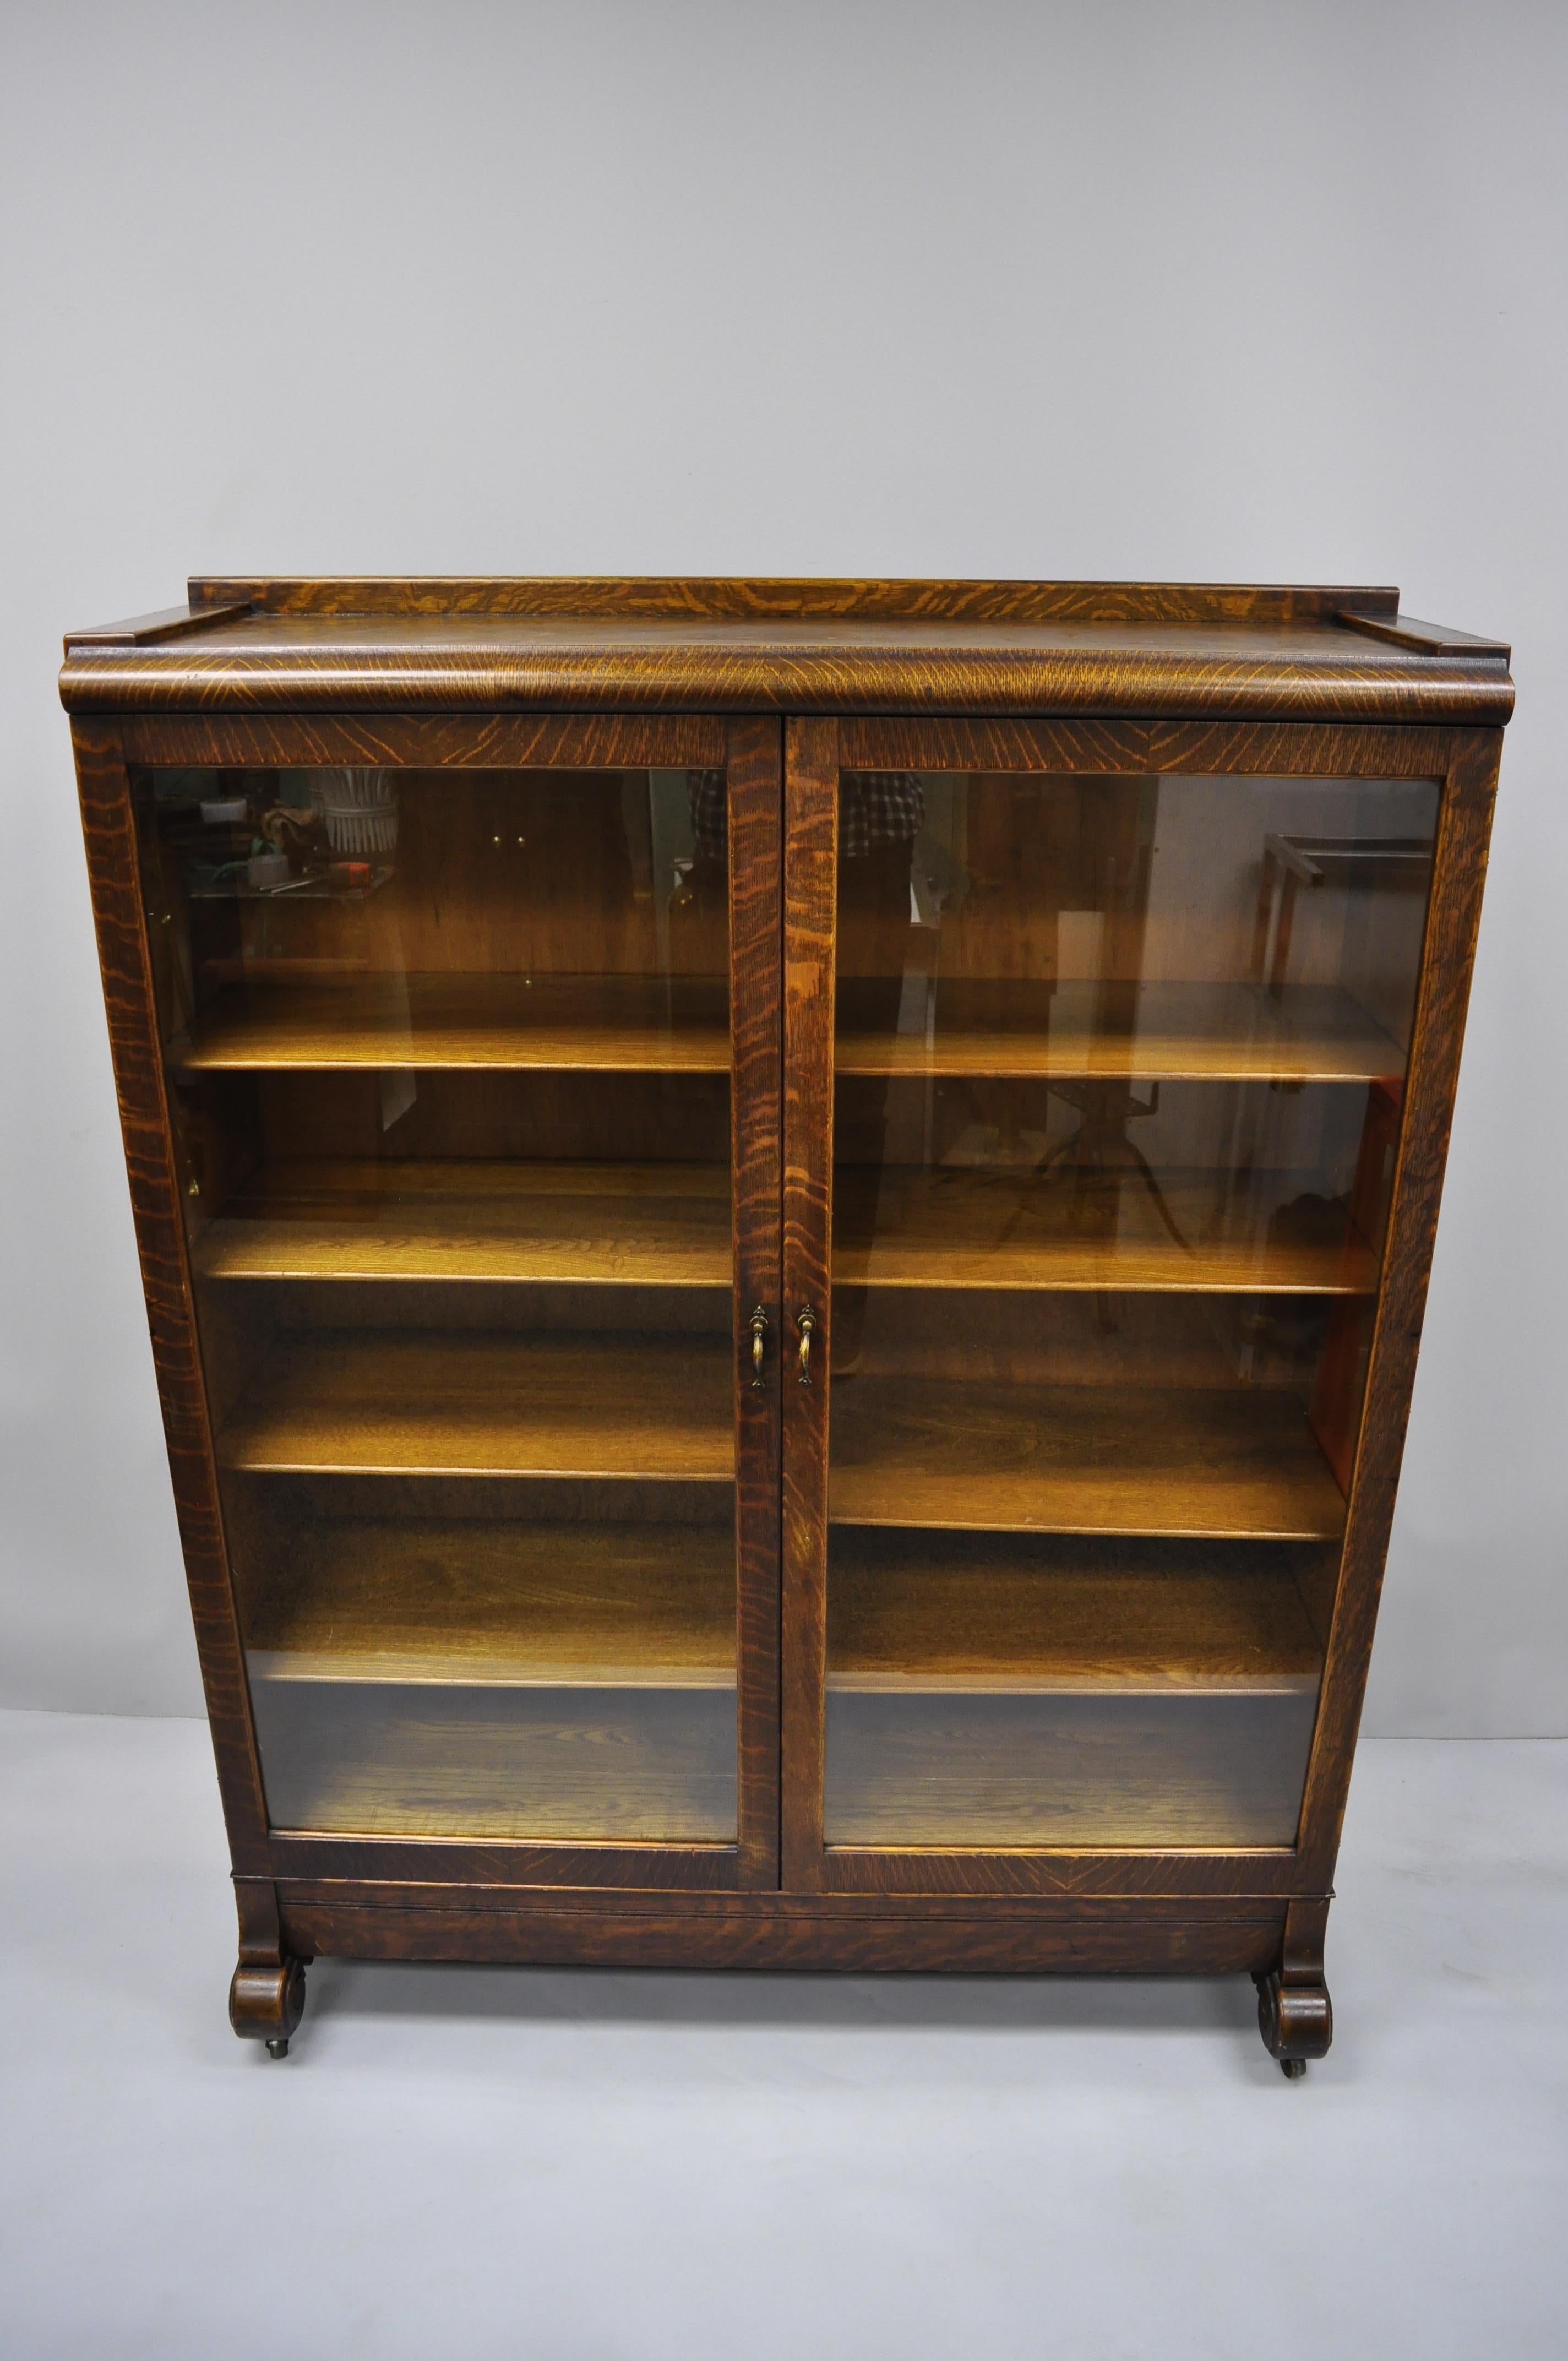 Antique Victorian golden tiger oak glass double door china cabinet bookcase. Item features rolling casters, beautiful wood grain, two swing doors, eight adjustable shelves, quality American craftsmanship. circa early 20th century. Measurements: 60